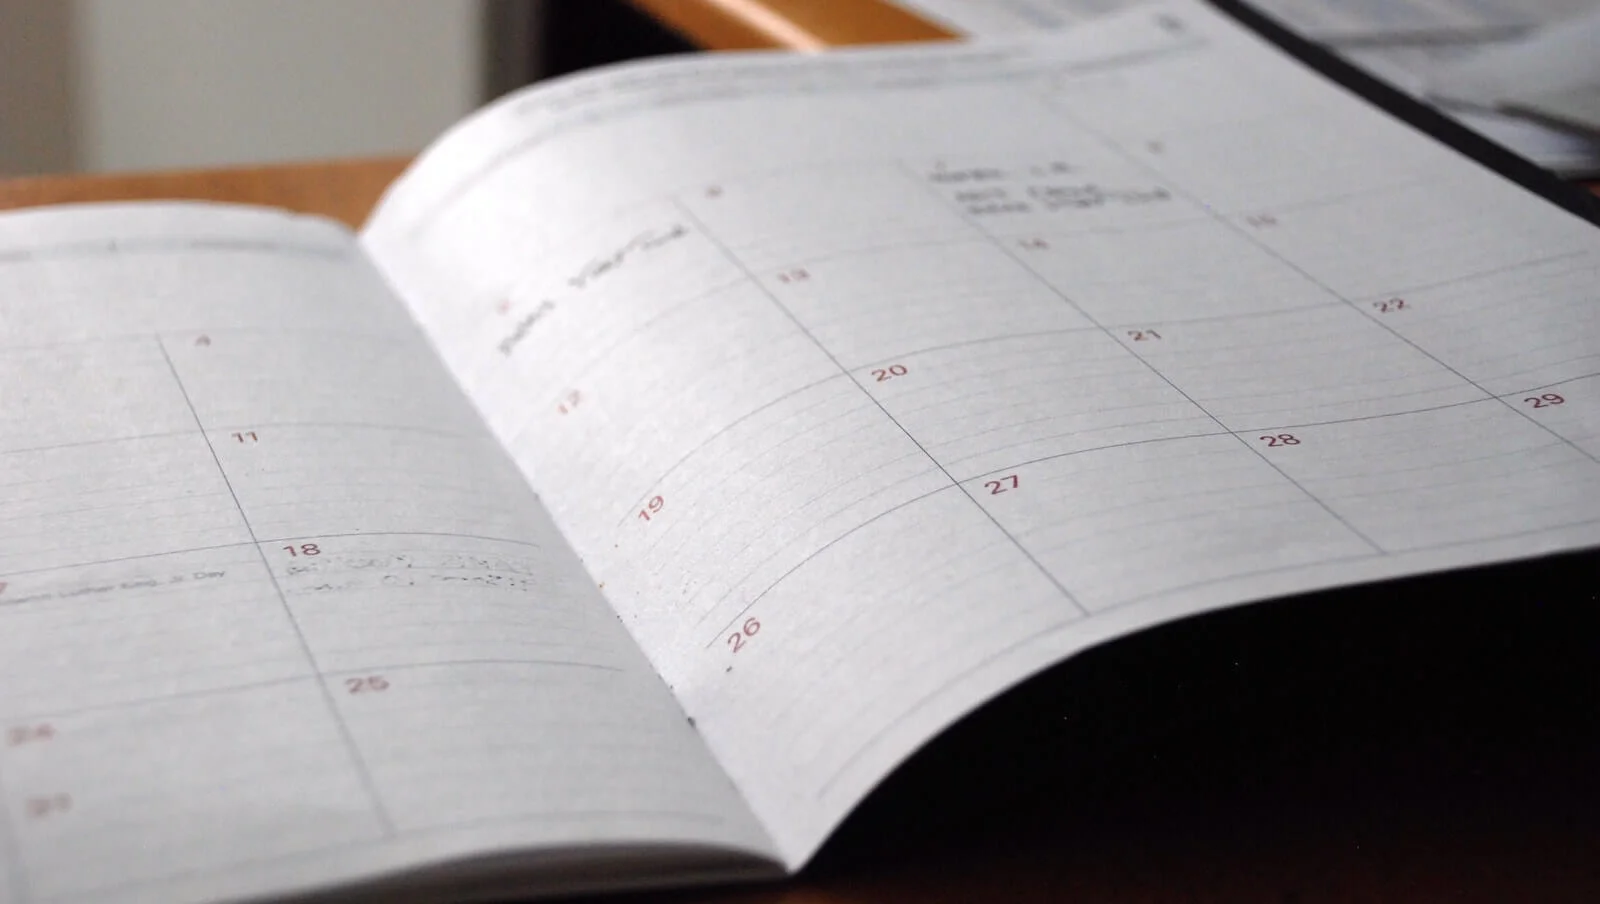 4 Mistakes You're Making When Getting Client Feedback on Your Video - Schedule